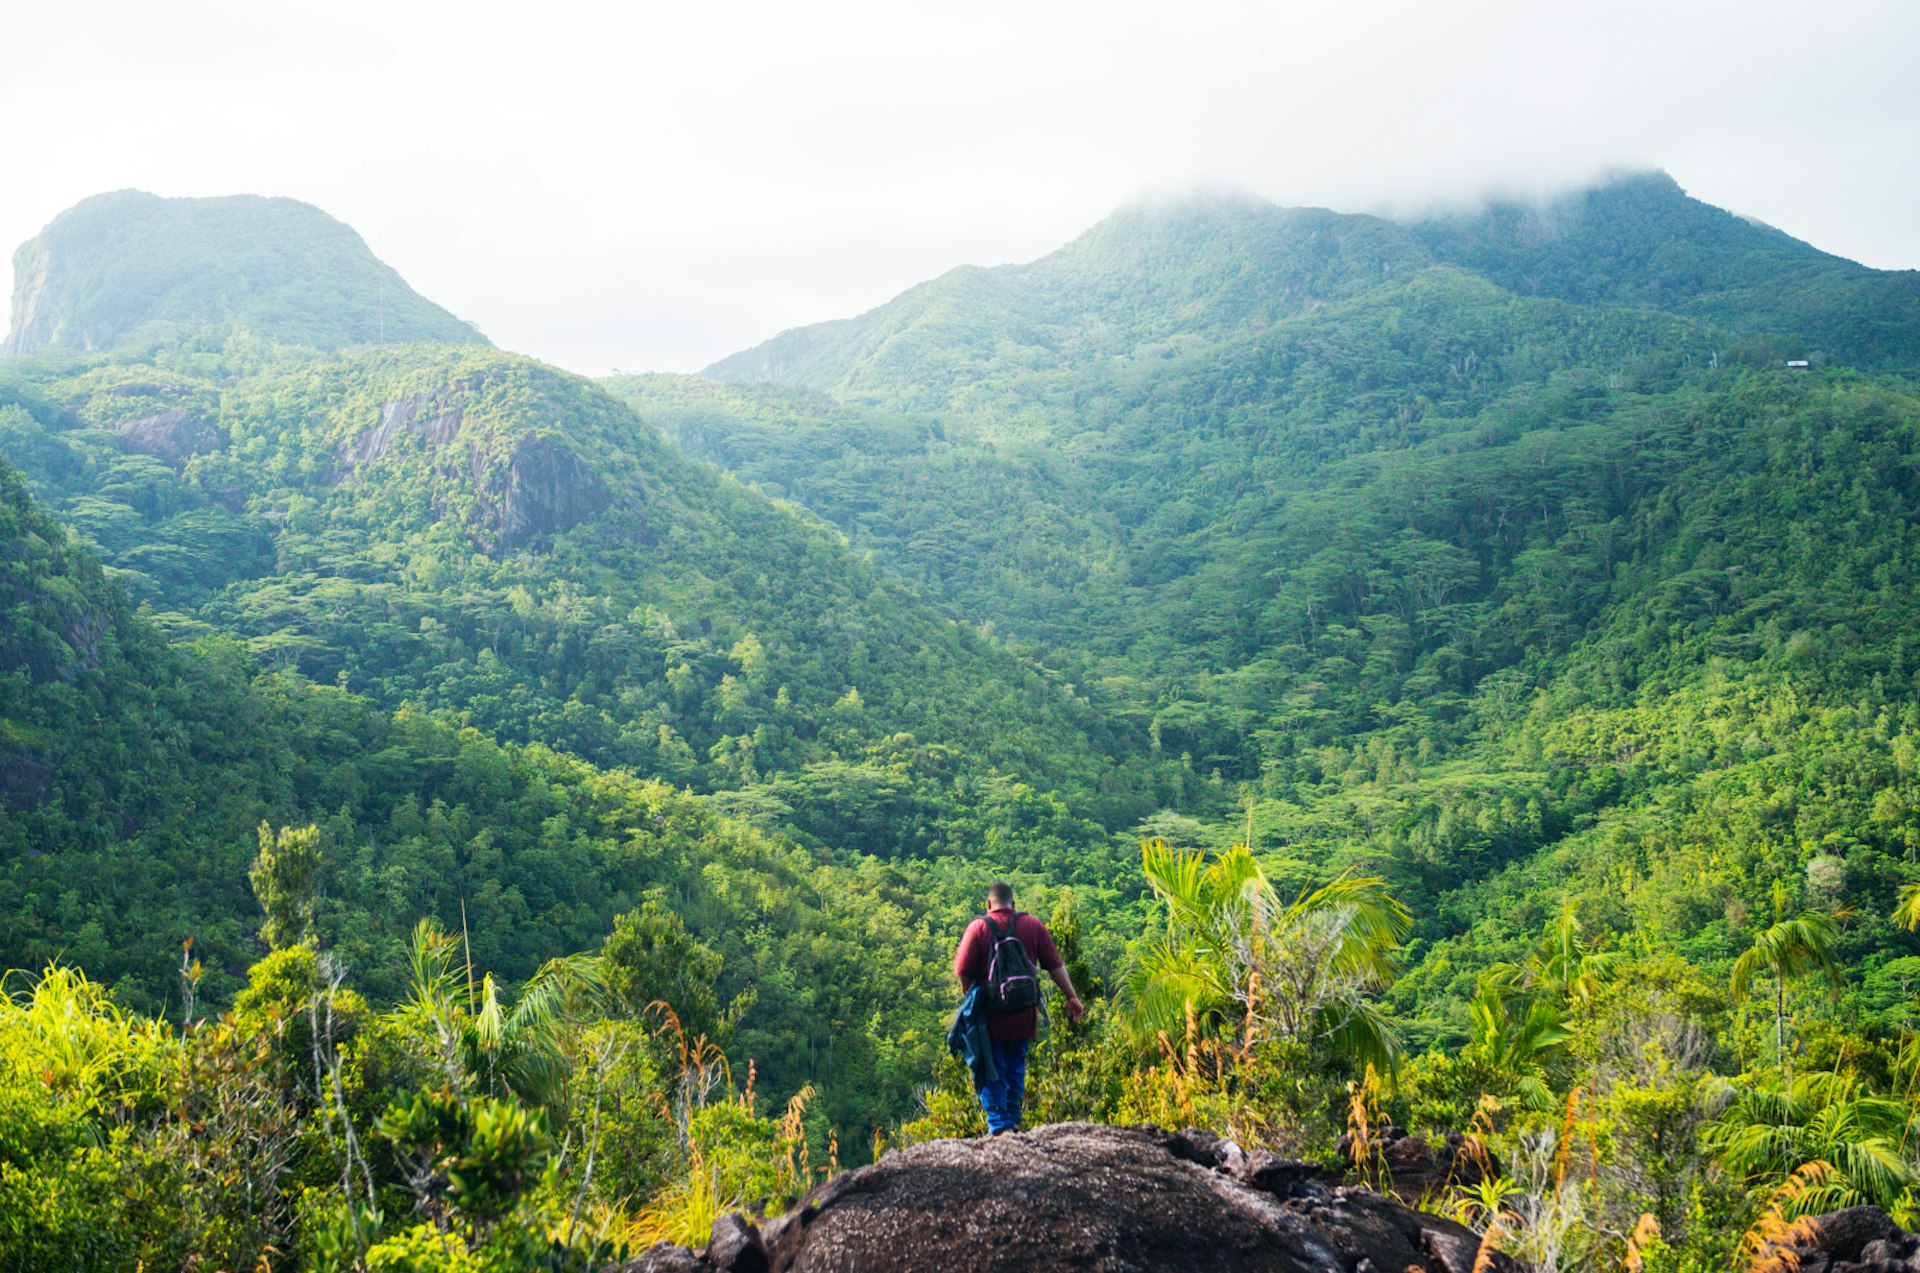 A man descends a rock outcrop into a dense forest which carpets the hills in the distance © Justin Foulkes/Lonely Planet 